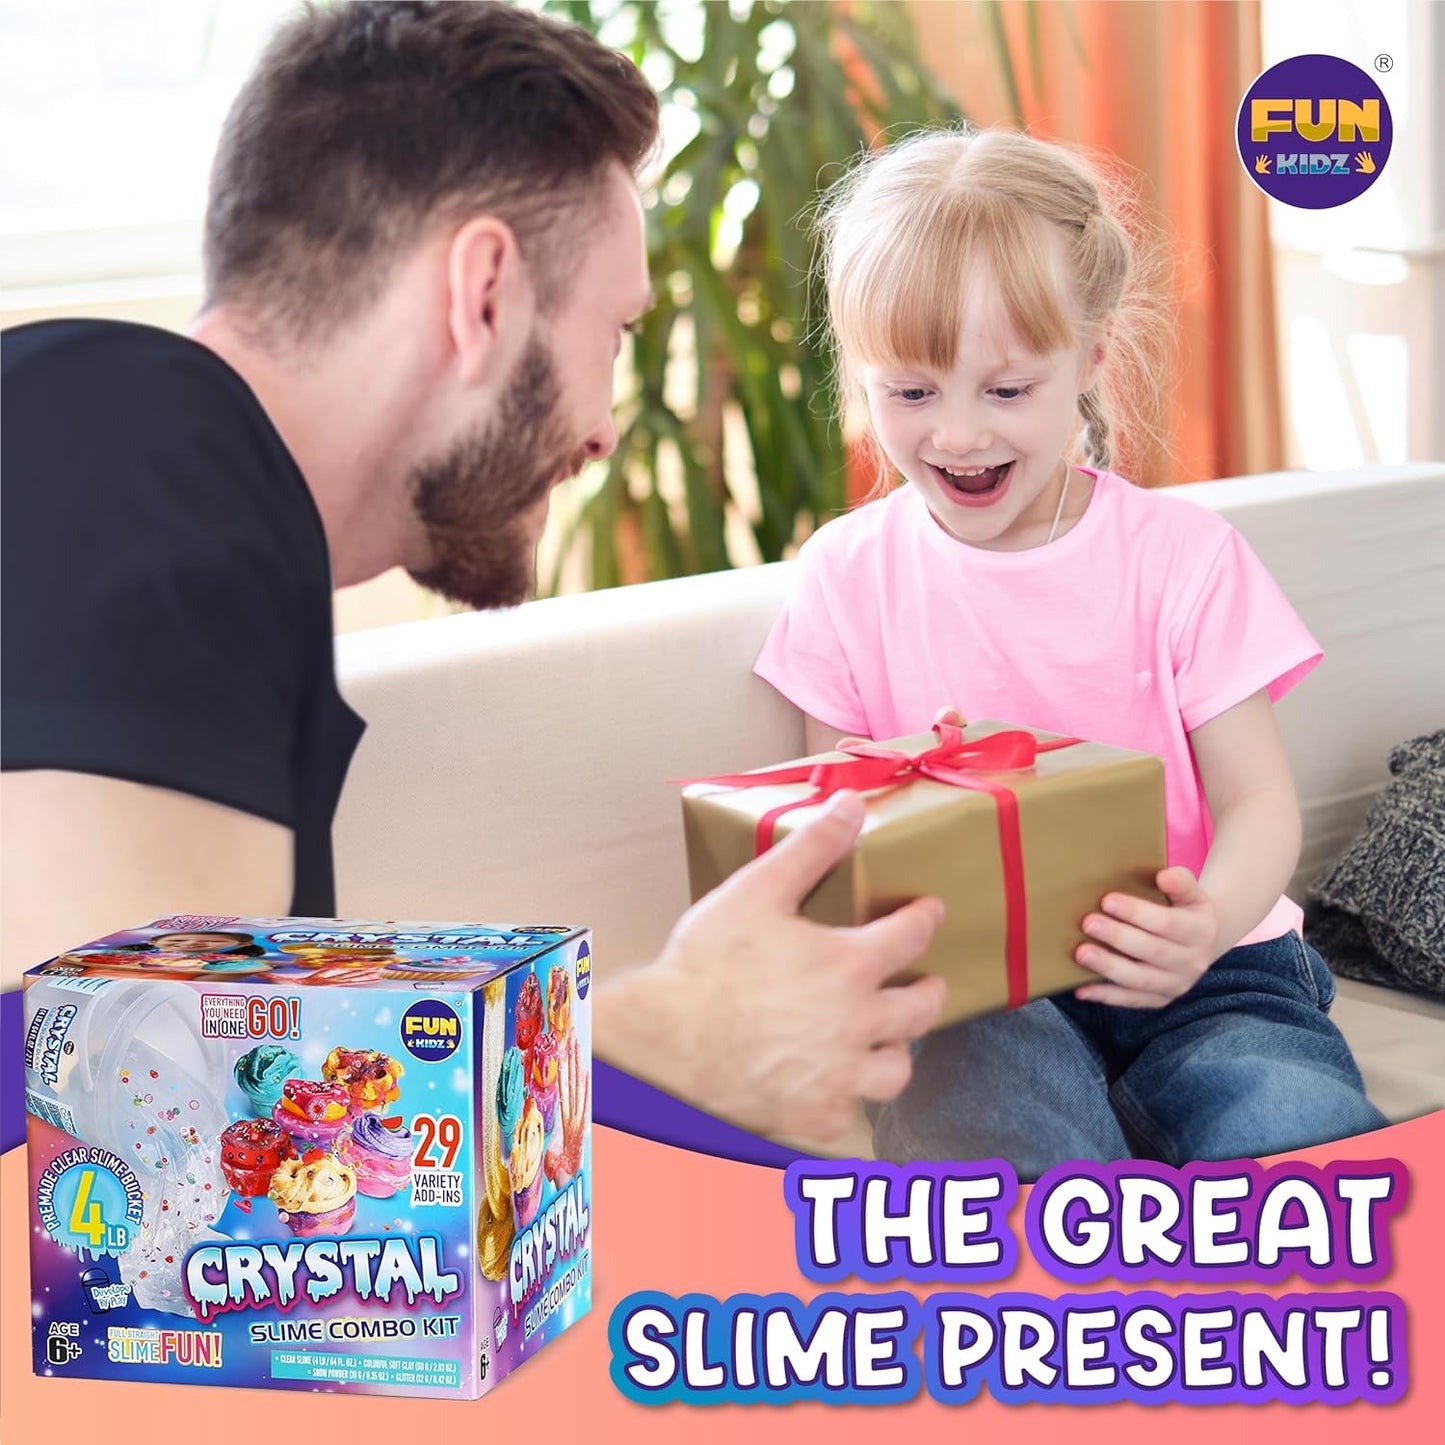 4 LB Huge Glassy Clear Slime Bucket Toy for Kids, Funkidz 64 FL OZ Premade Big Crystal Slime Pack Gift with 29 Sets Add-Ins Jumbo Slime Kit for Girls Boys Party Present